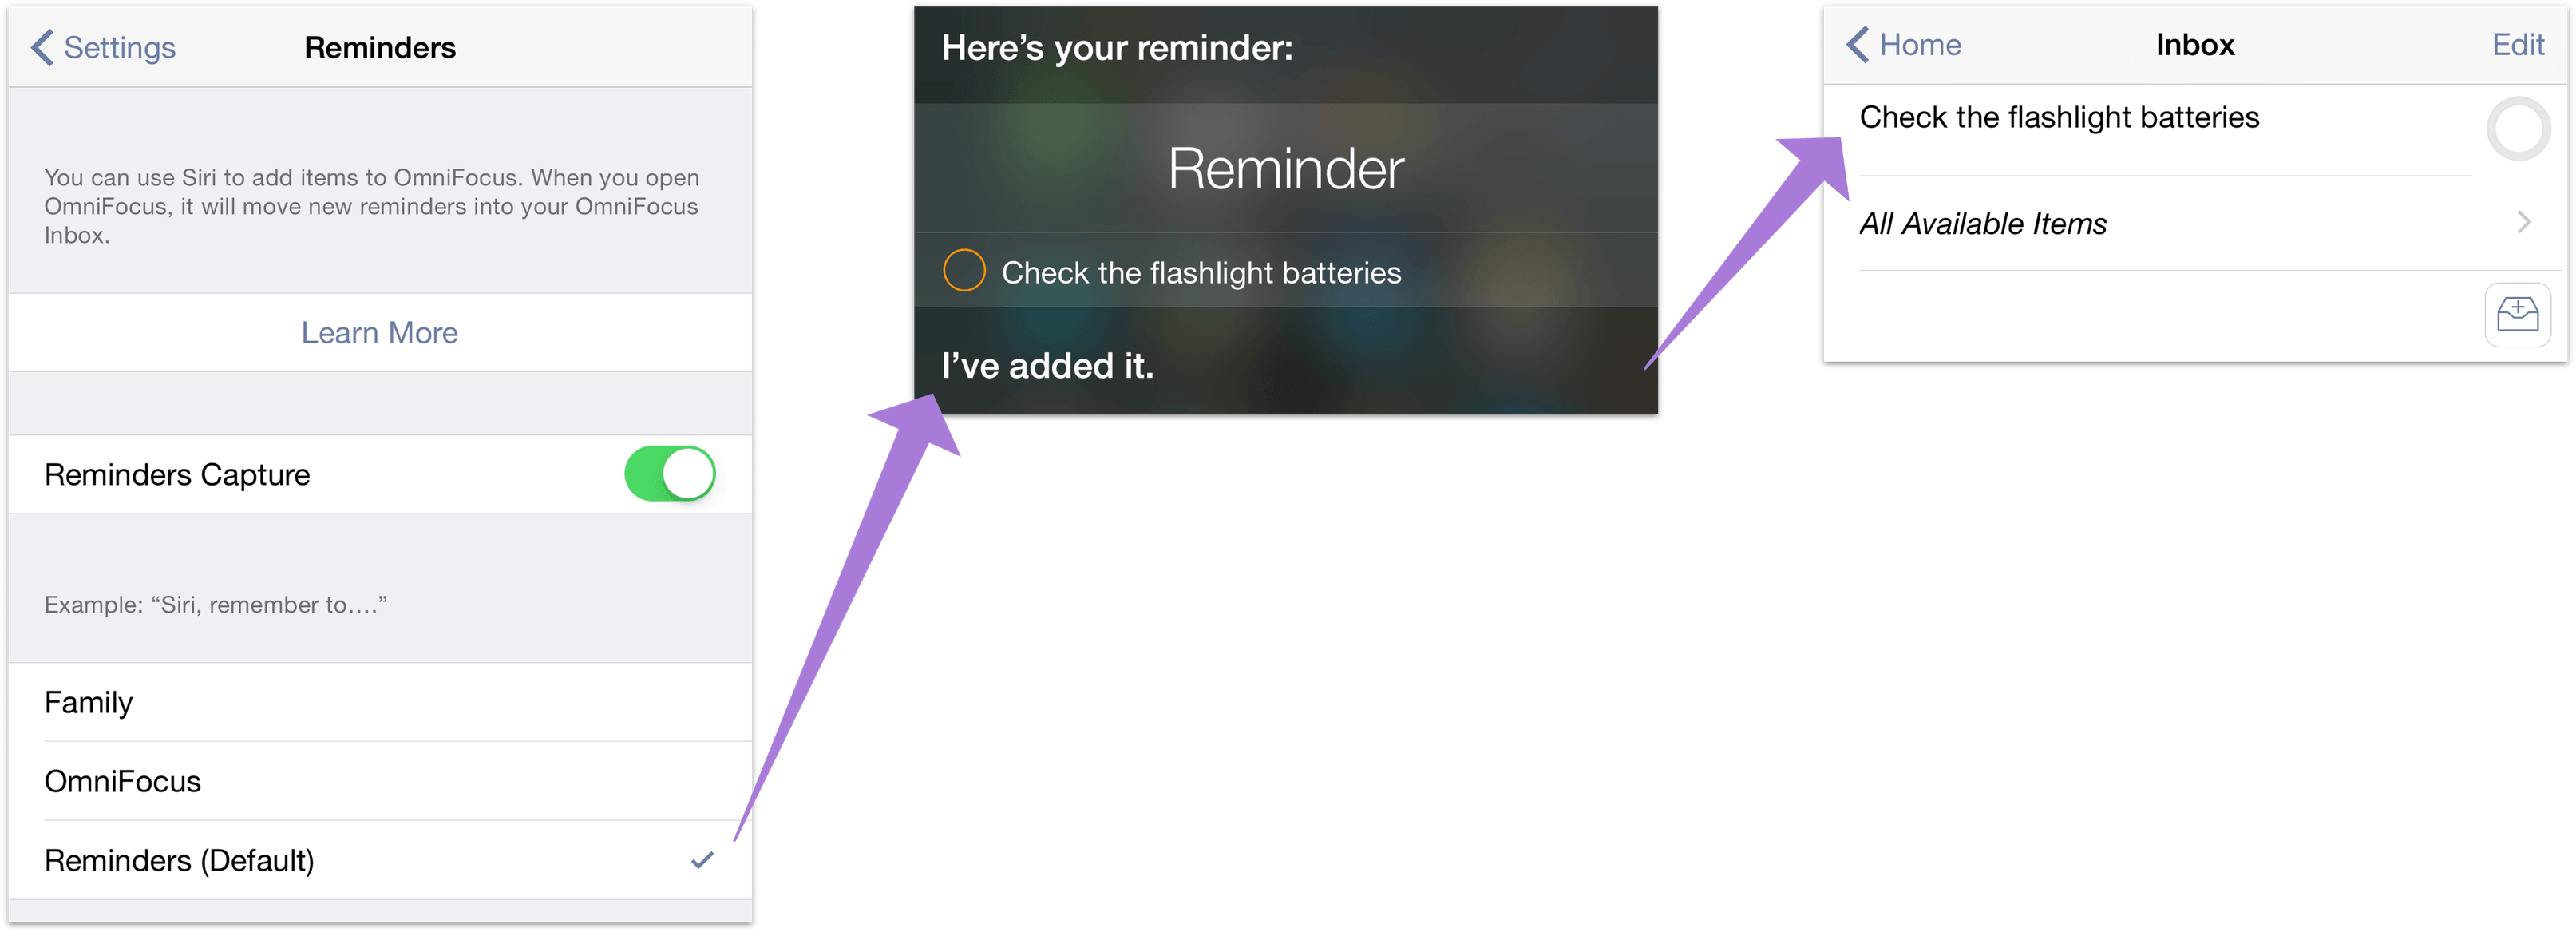 Setting up Reminders capture, and getting items into your OmniFocus Inbox with Siri.